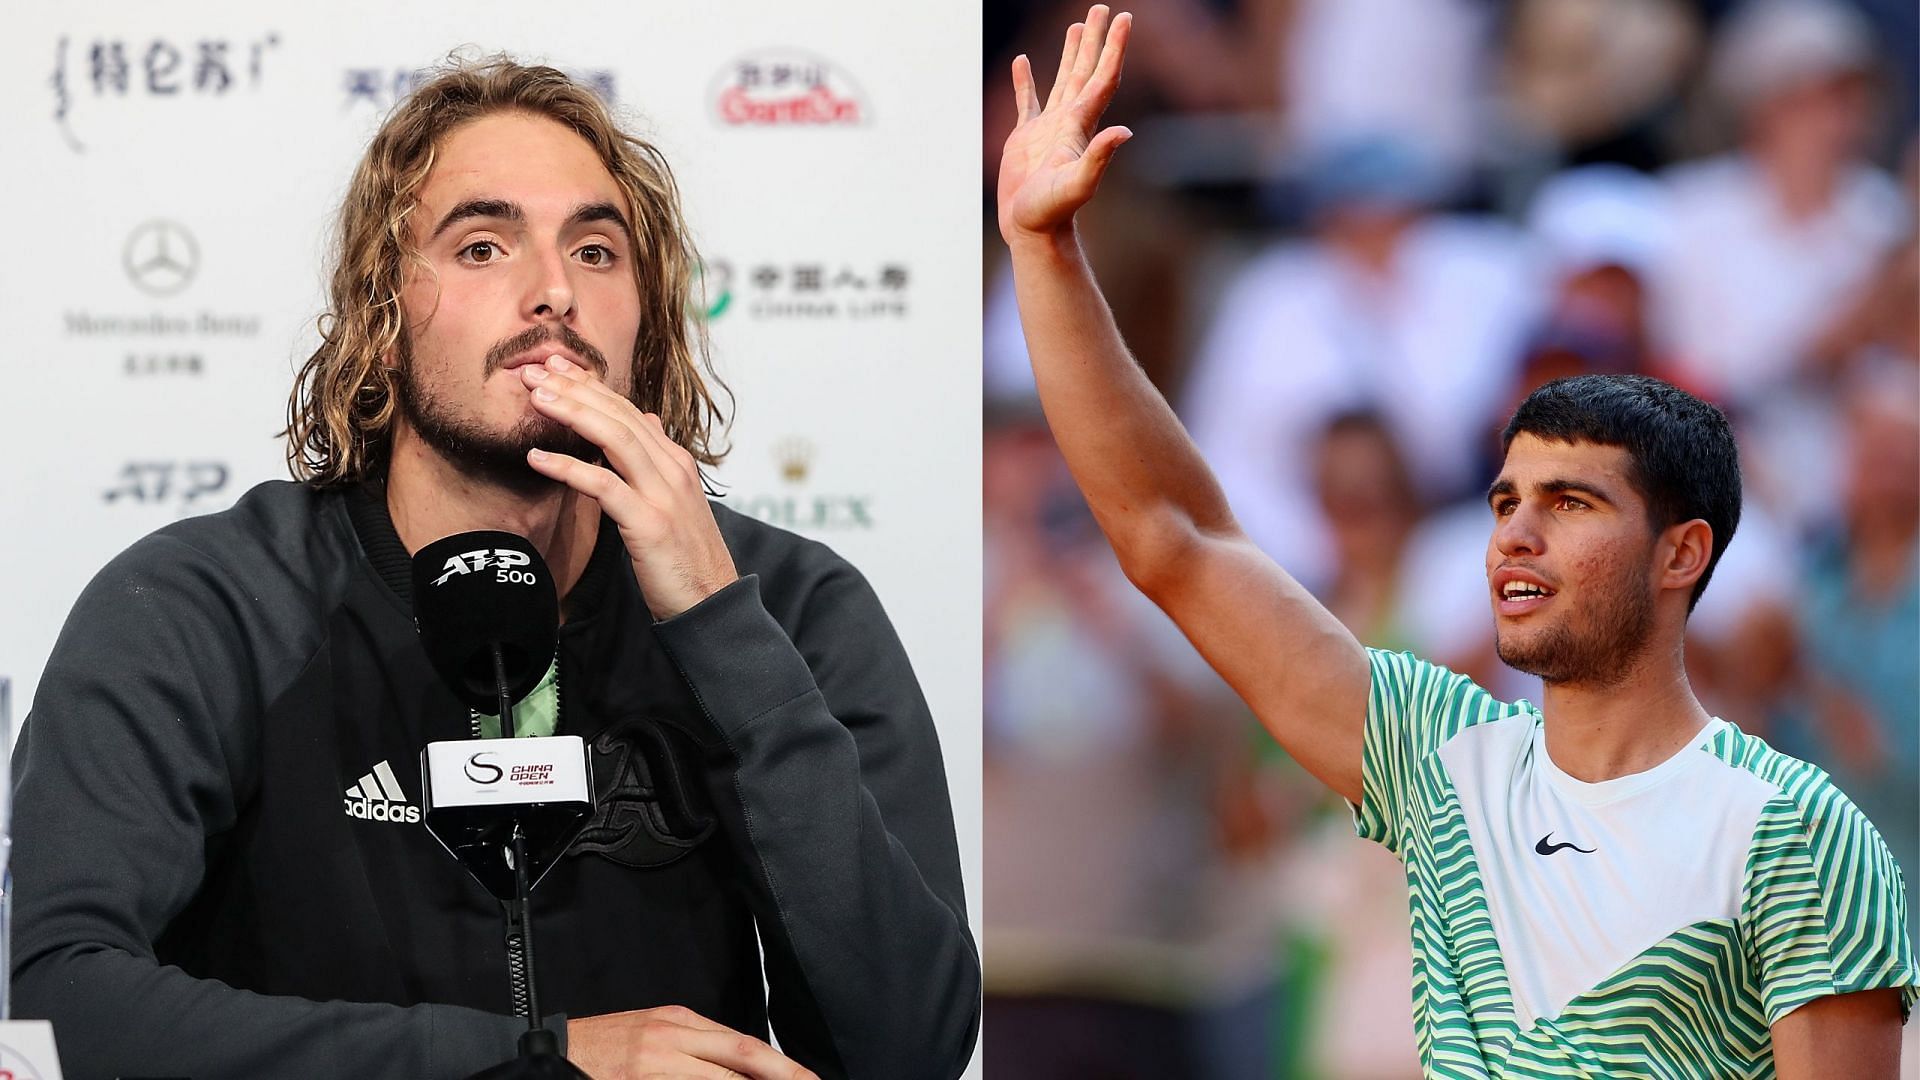 Stefanos Tsitsipas is looking forward to facing Carlos Alcaraz at the 2023 French Open.